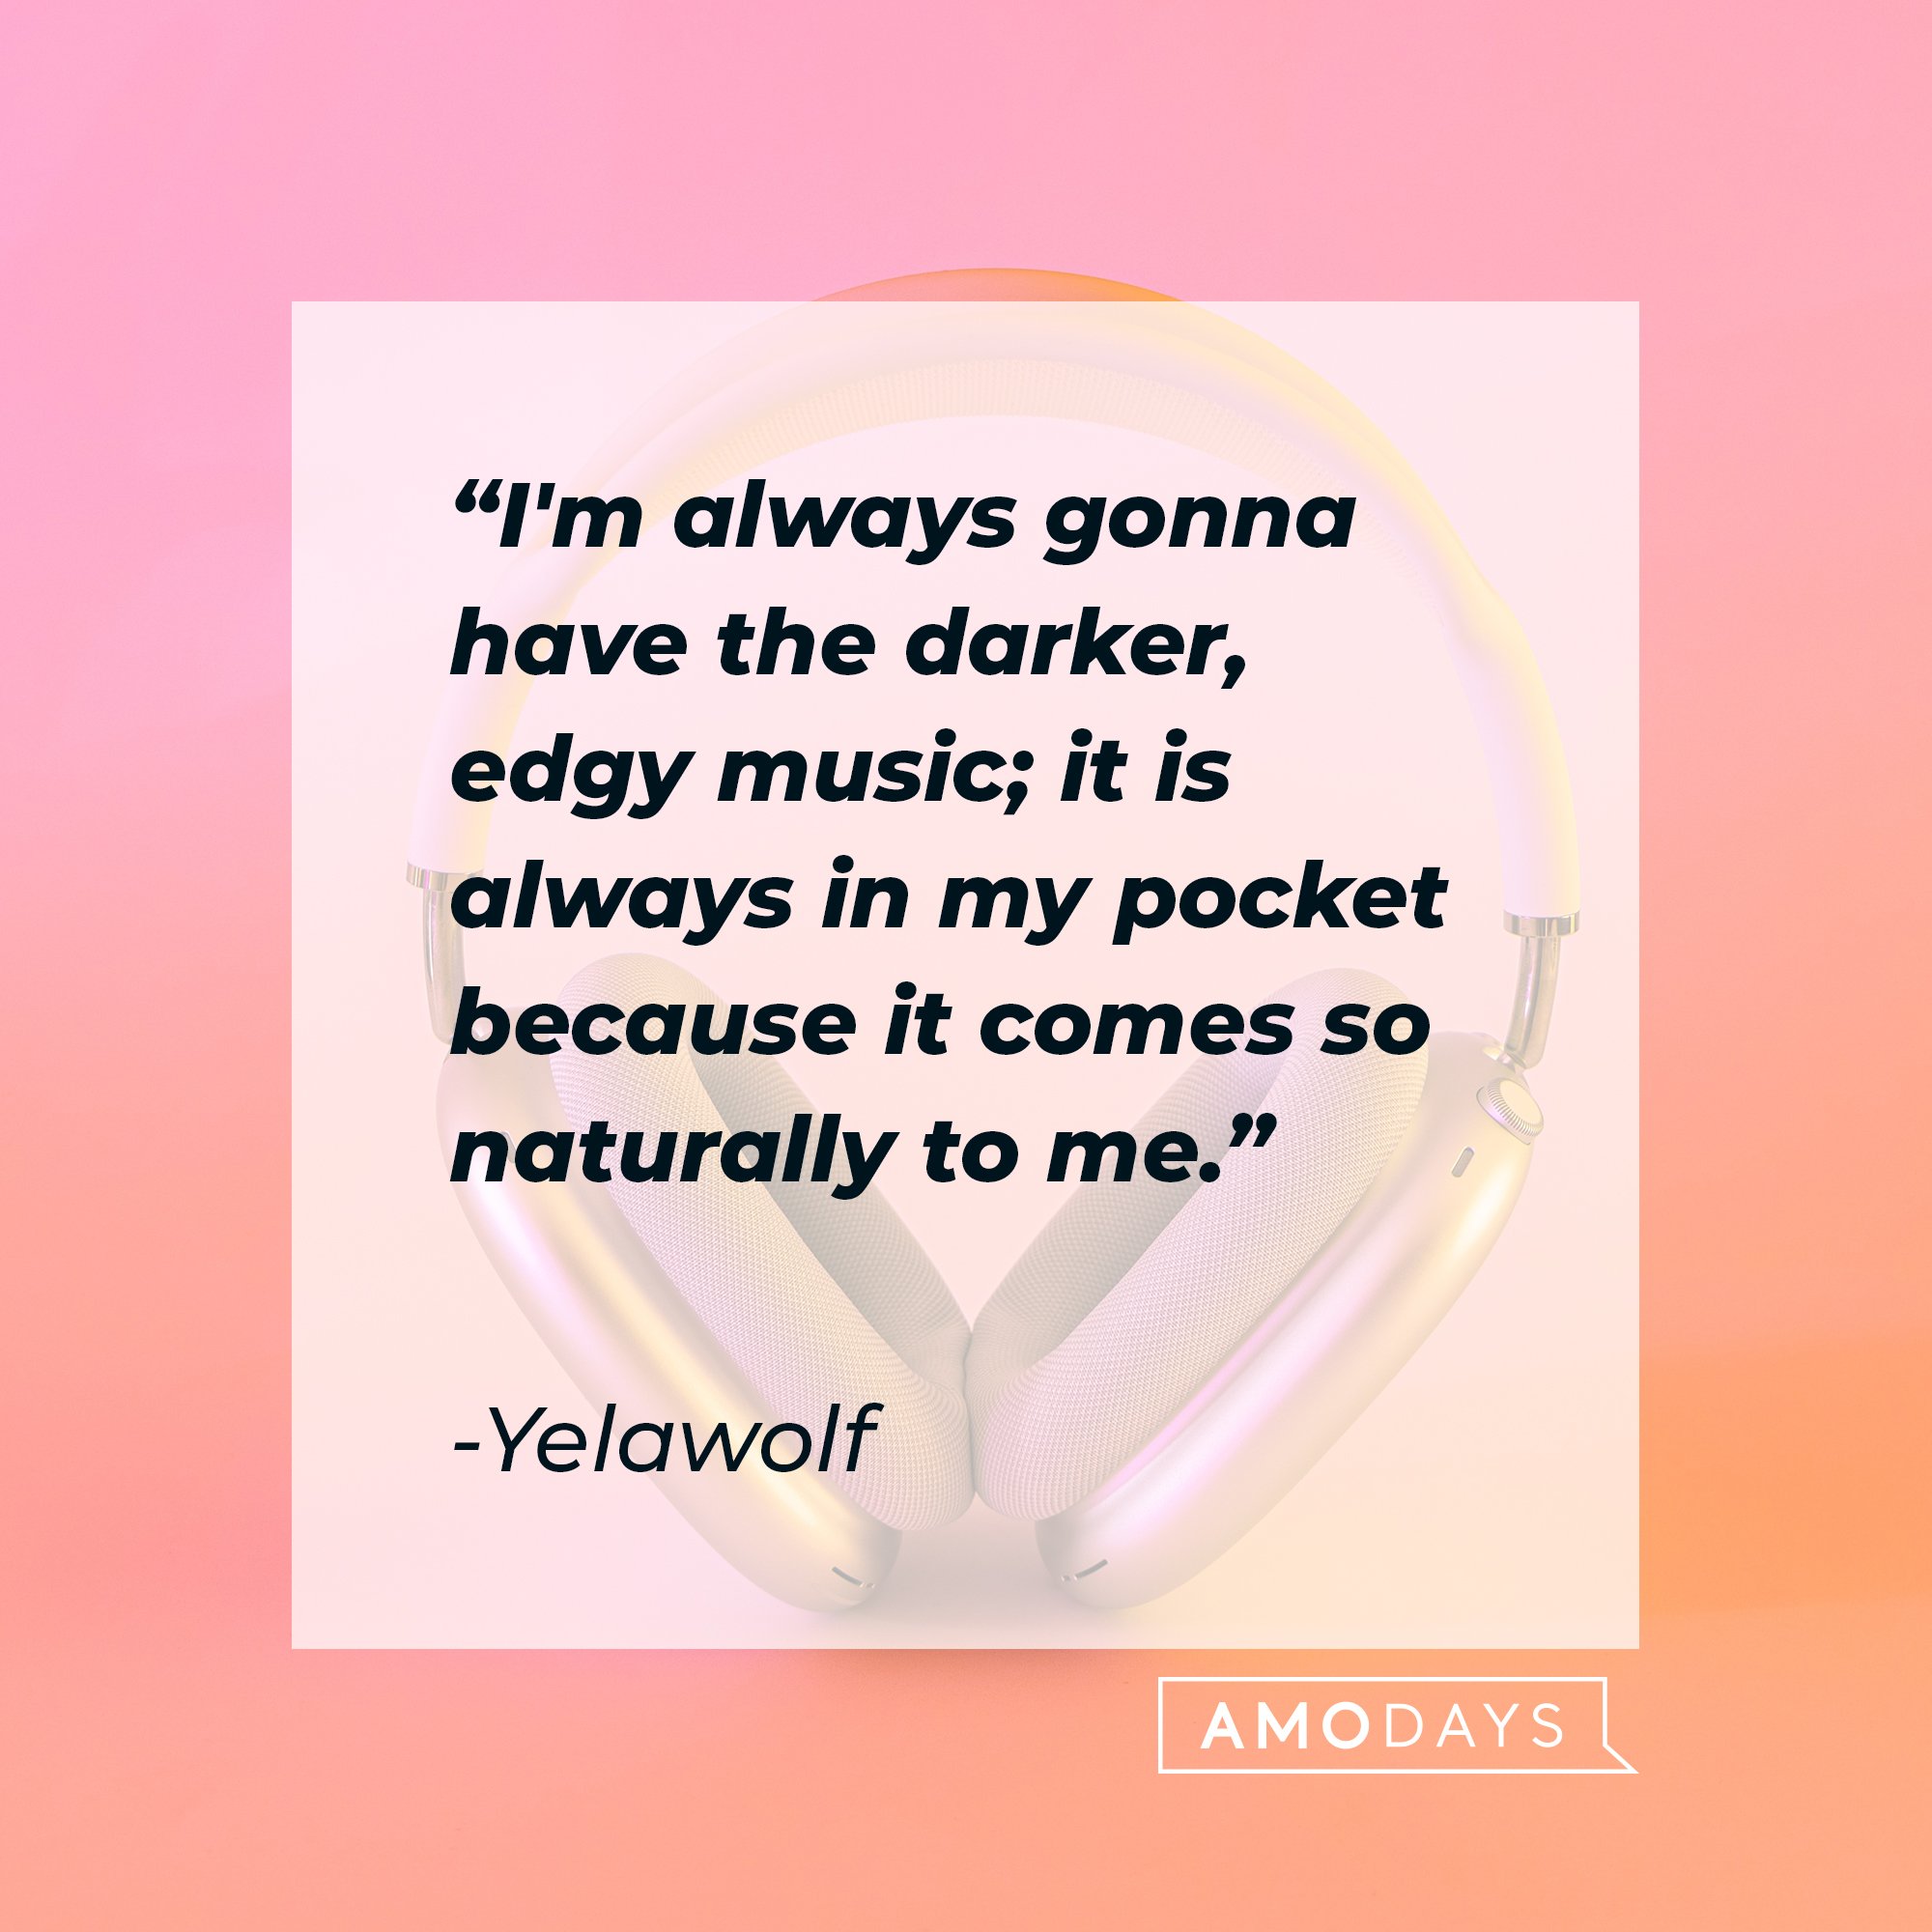 Yelawolf’s quote: "I'm always gonna have the darker, edgy music; it is always in my pocket because it comes so naturally to me.” | Image: AmoDays